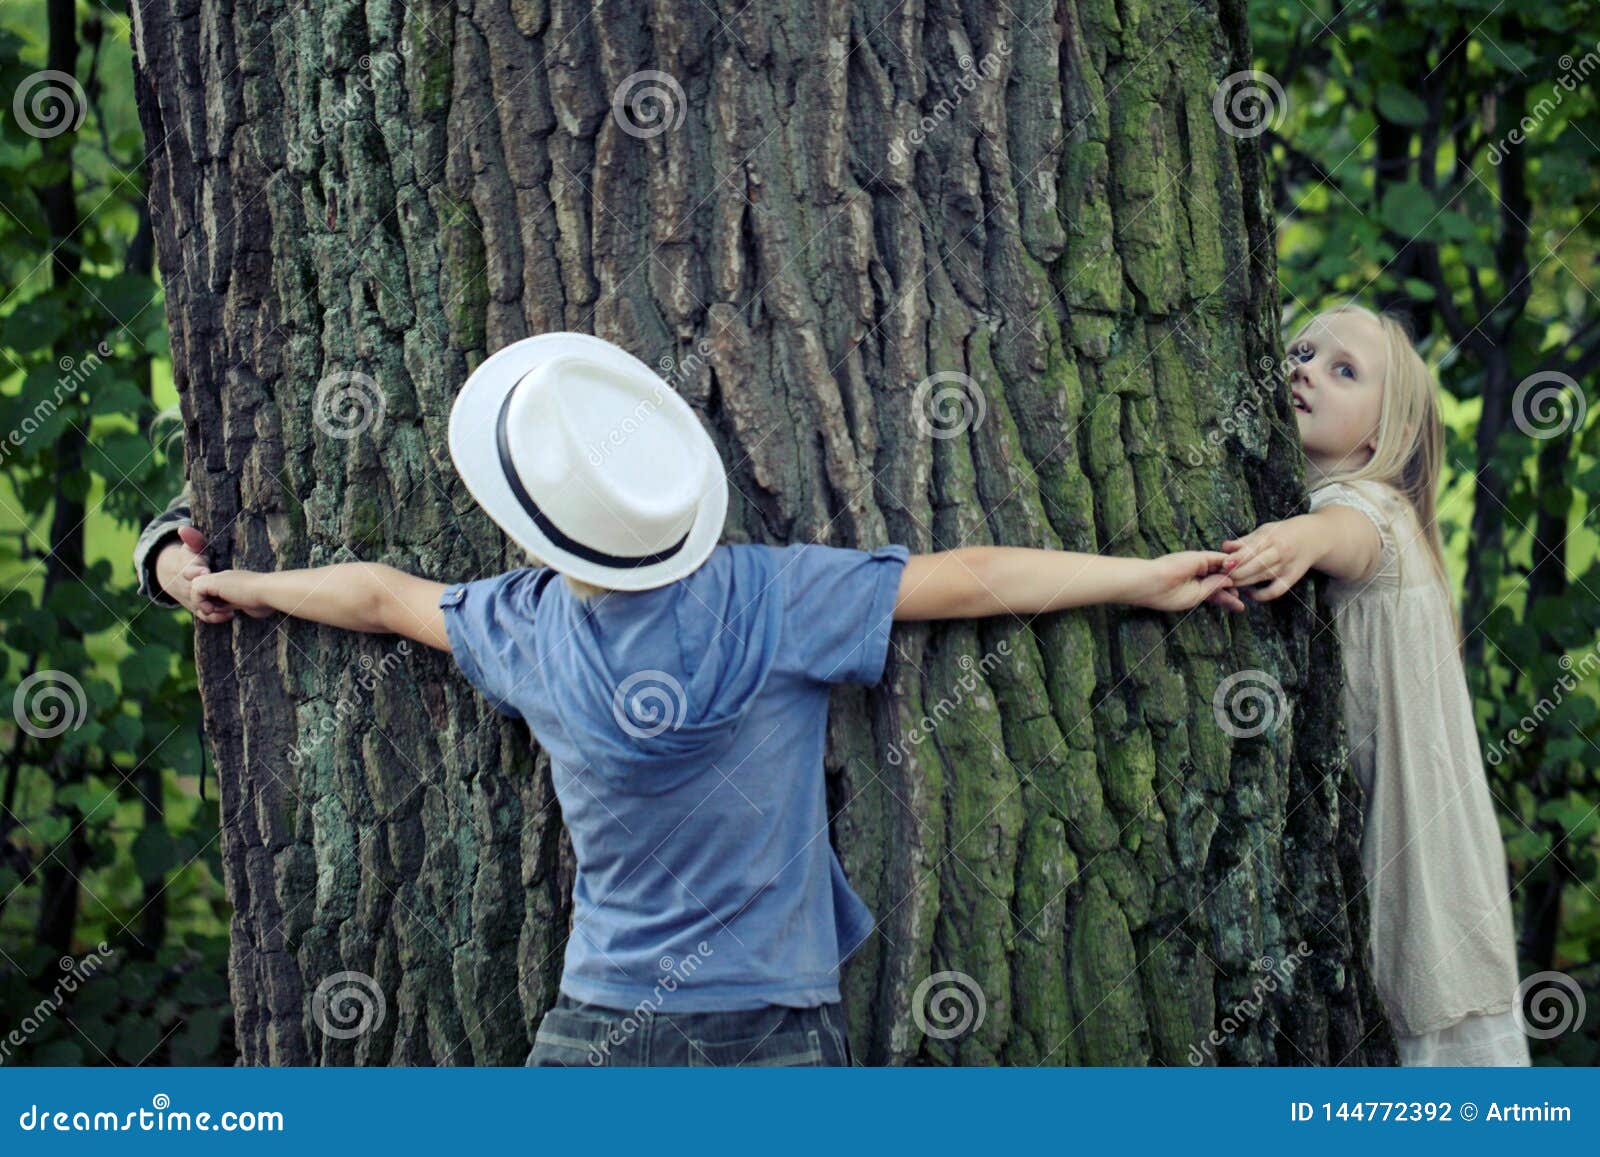 Children Embracing Tree. Environmental Protection Outdoor Nature